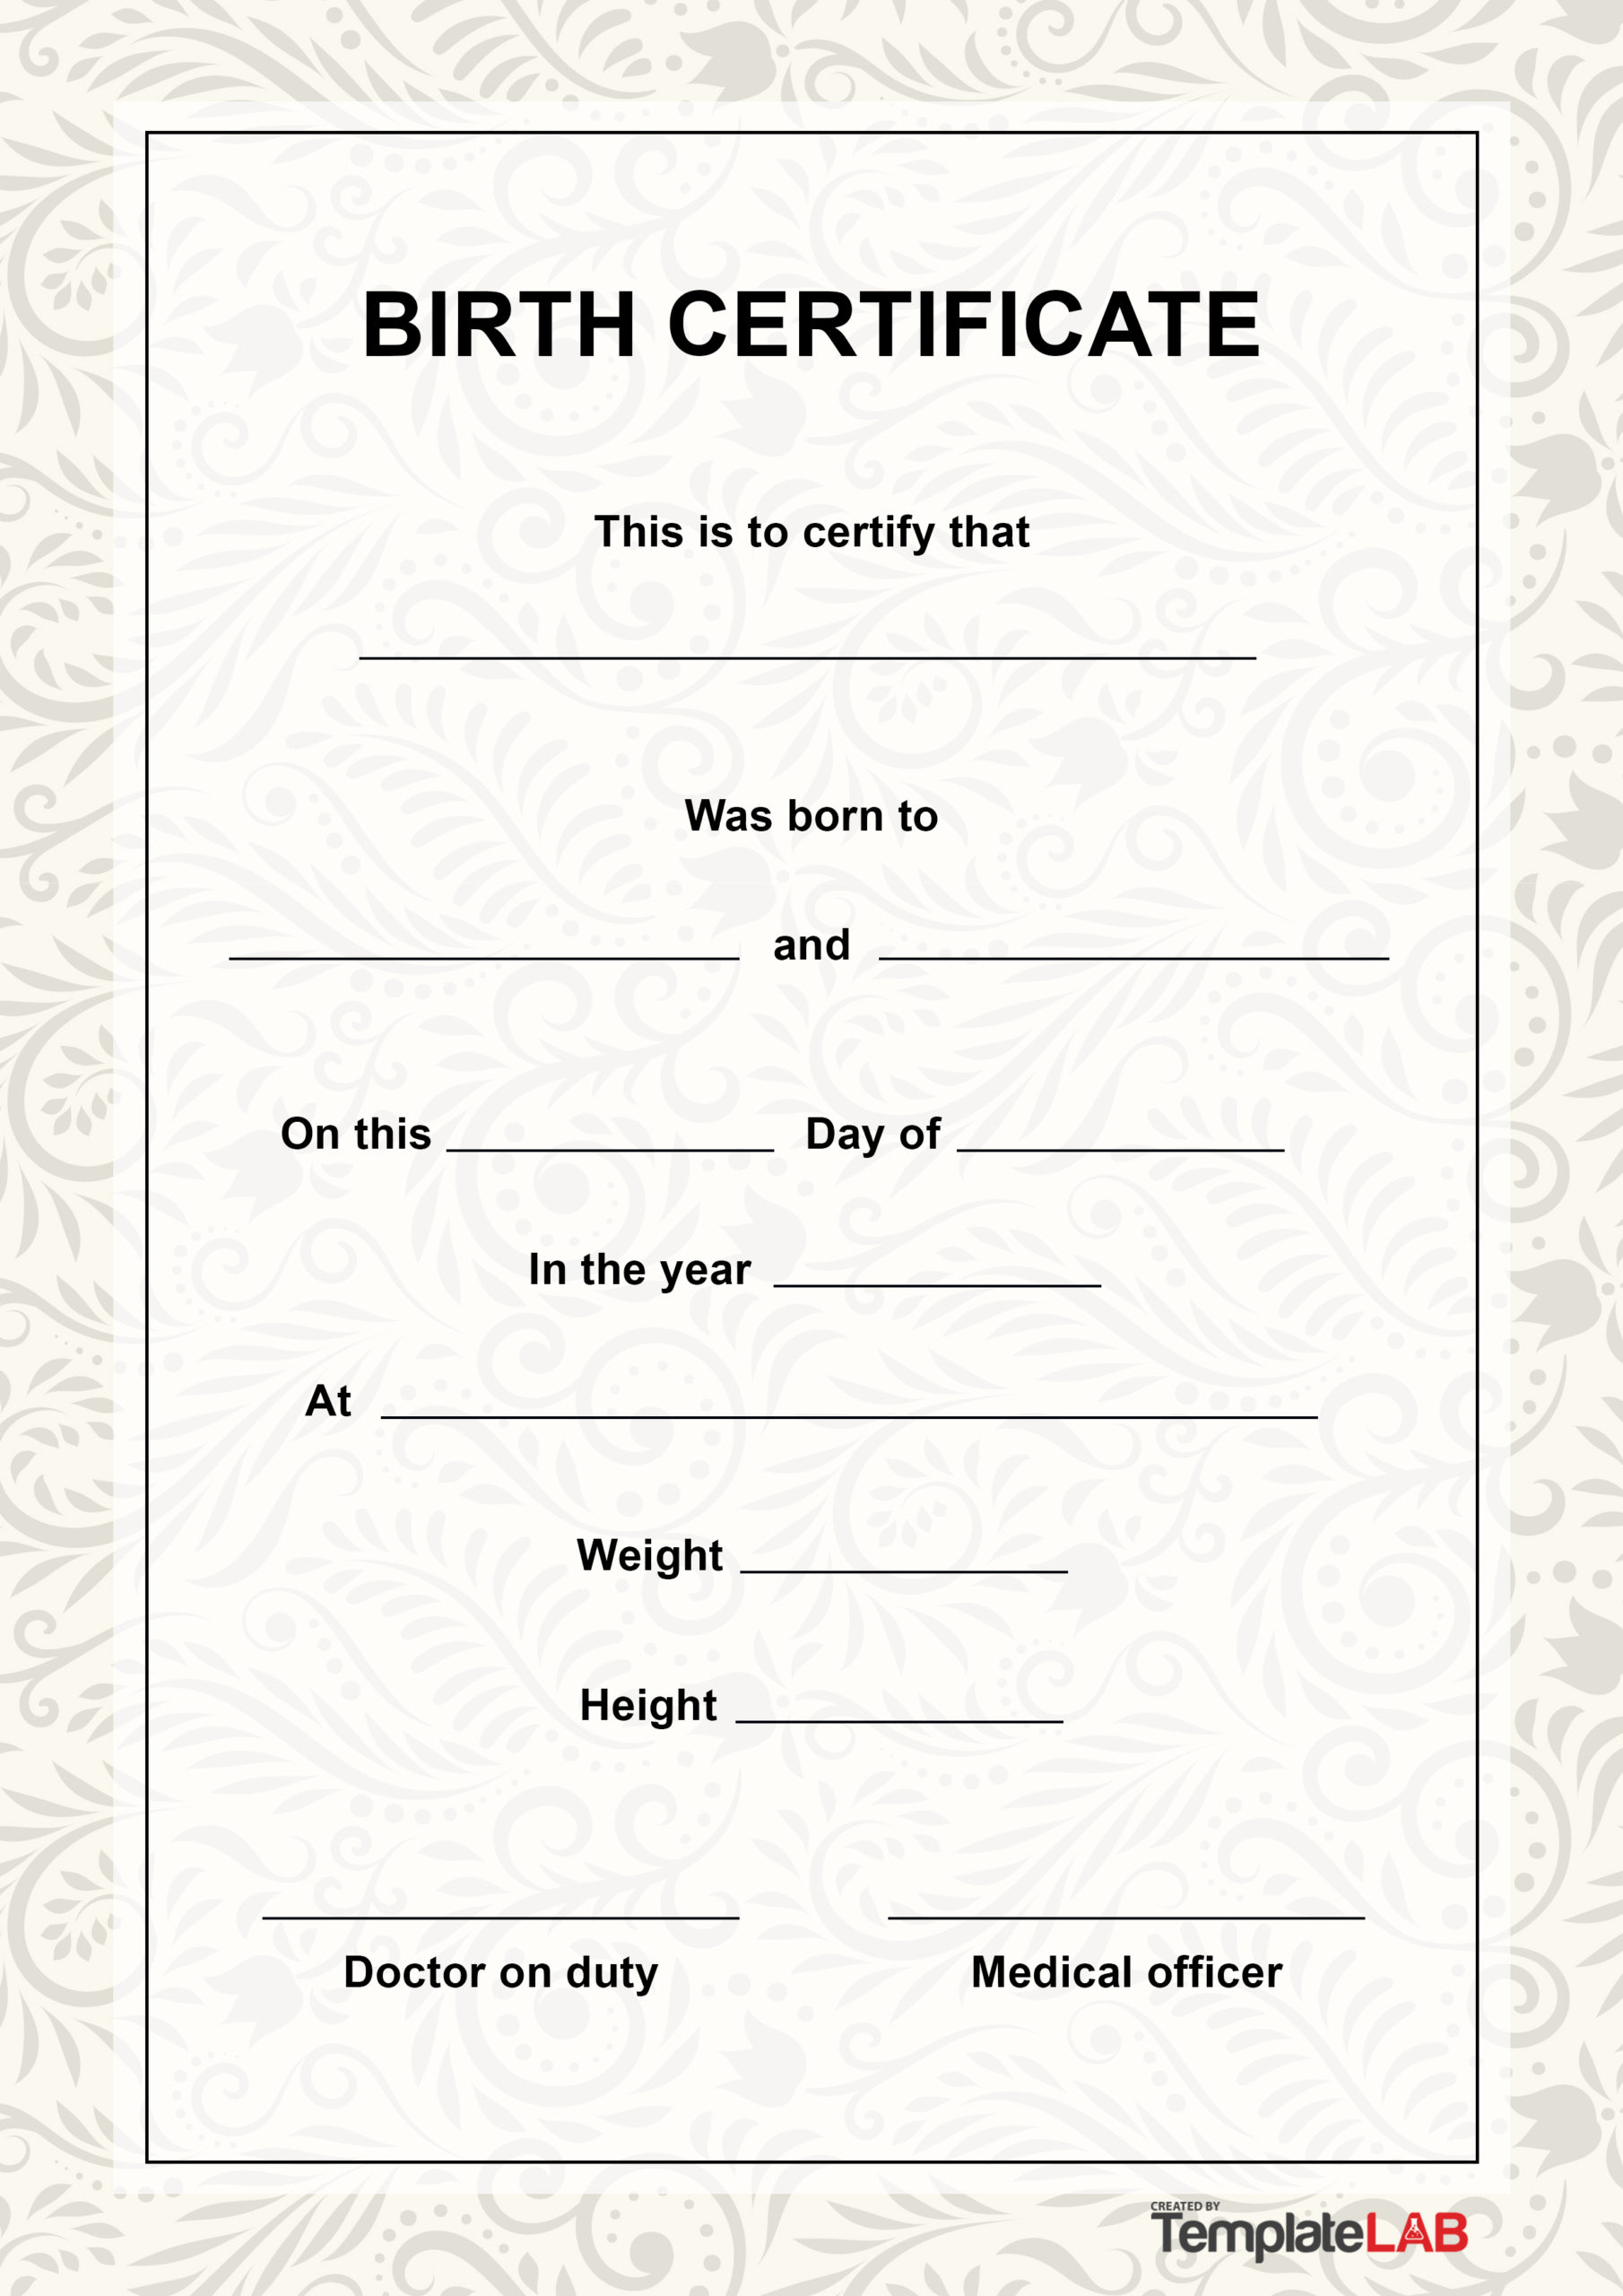 Birth Certificate Template With Footprints Collection